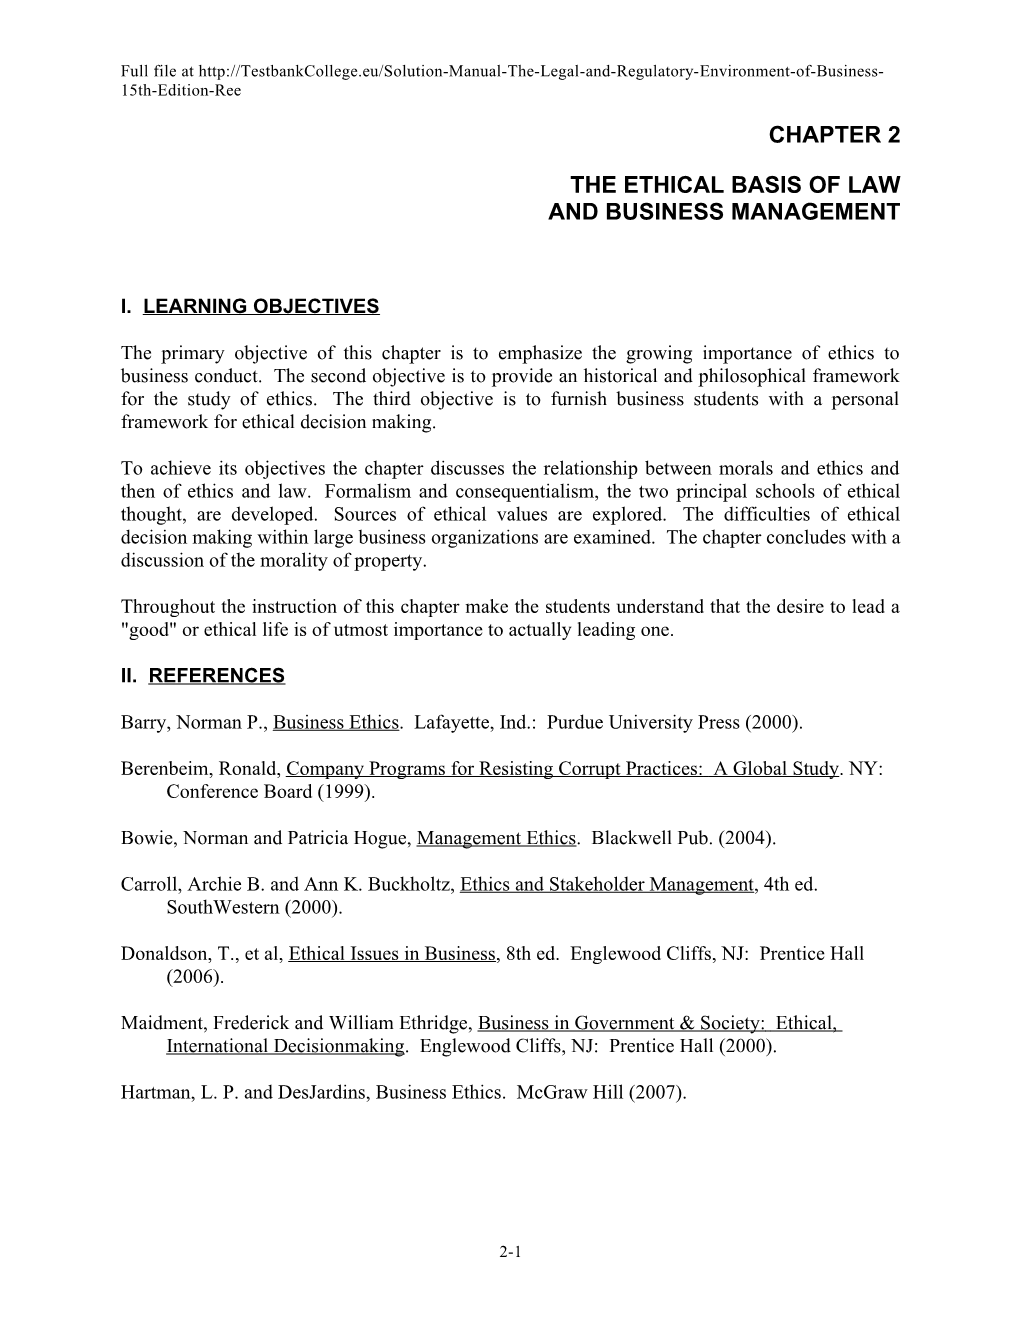 The Ethical Basis of Law